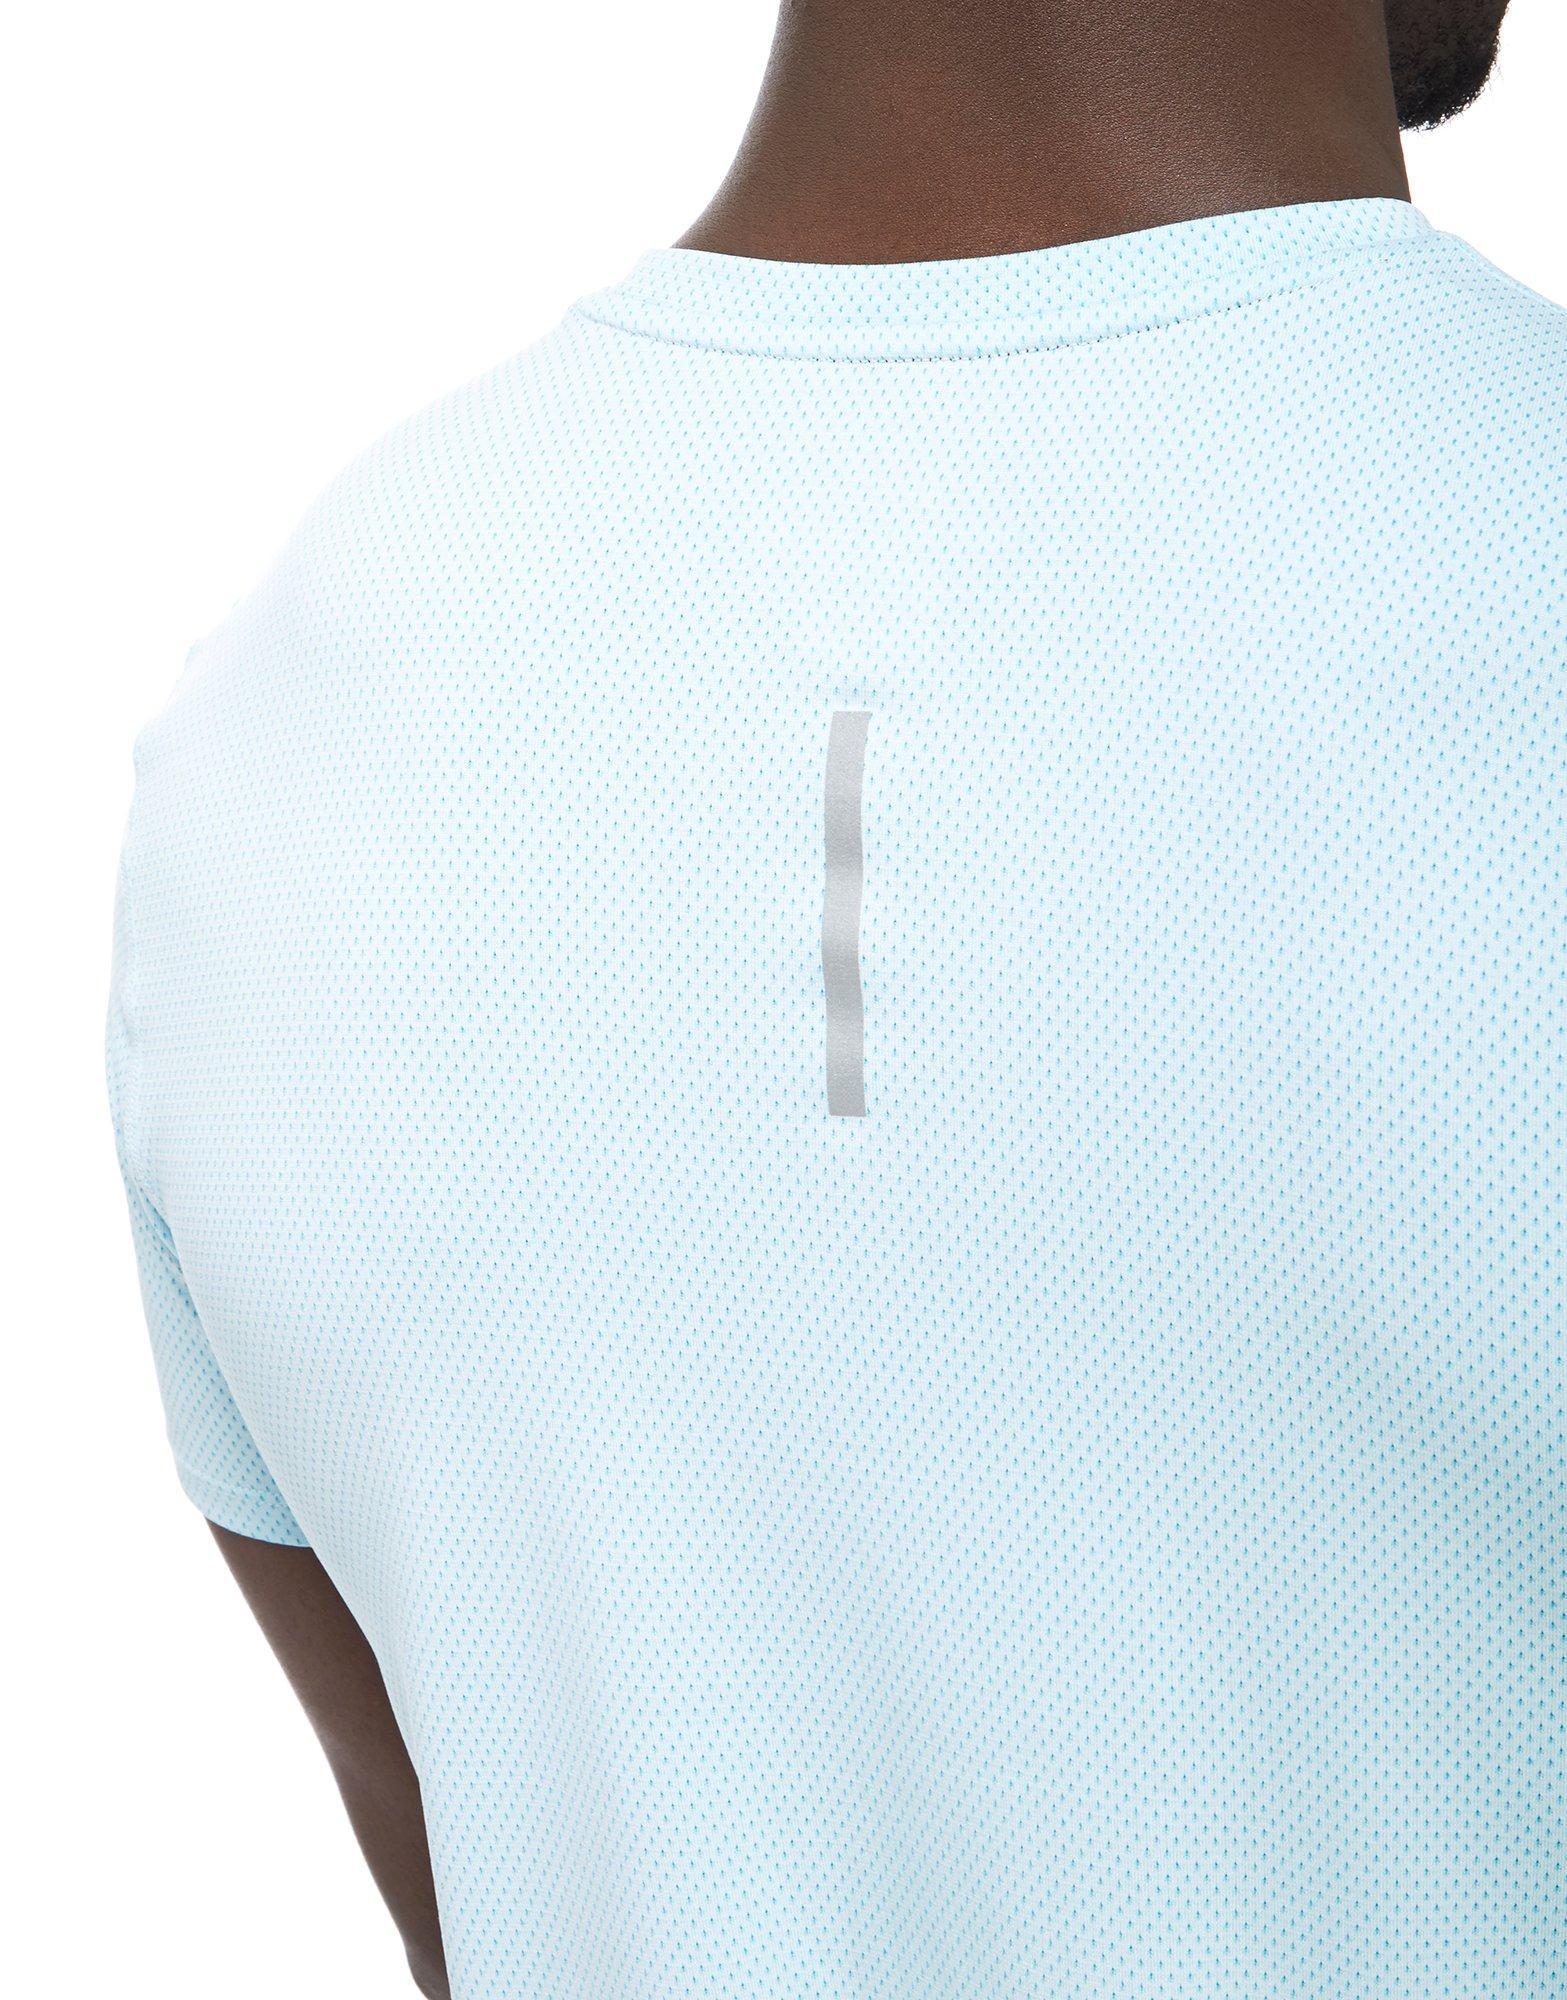 Lyst - Nike Zonal Cooling Relay T-shirt in Blue for Men